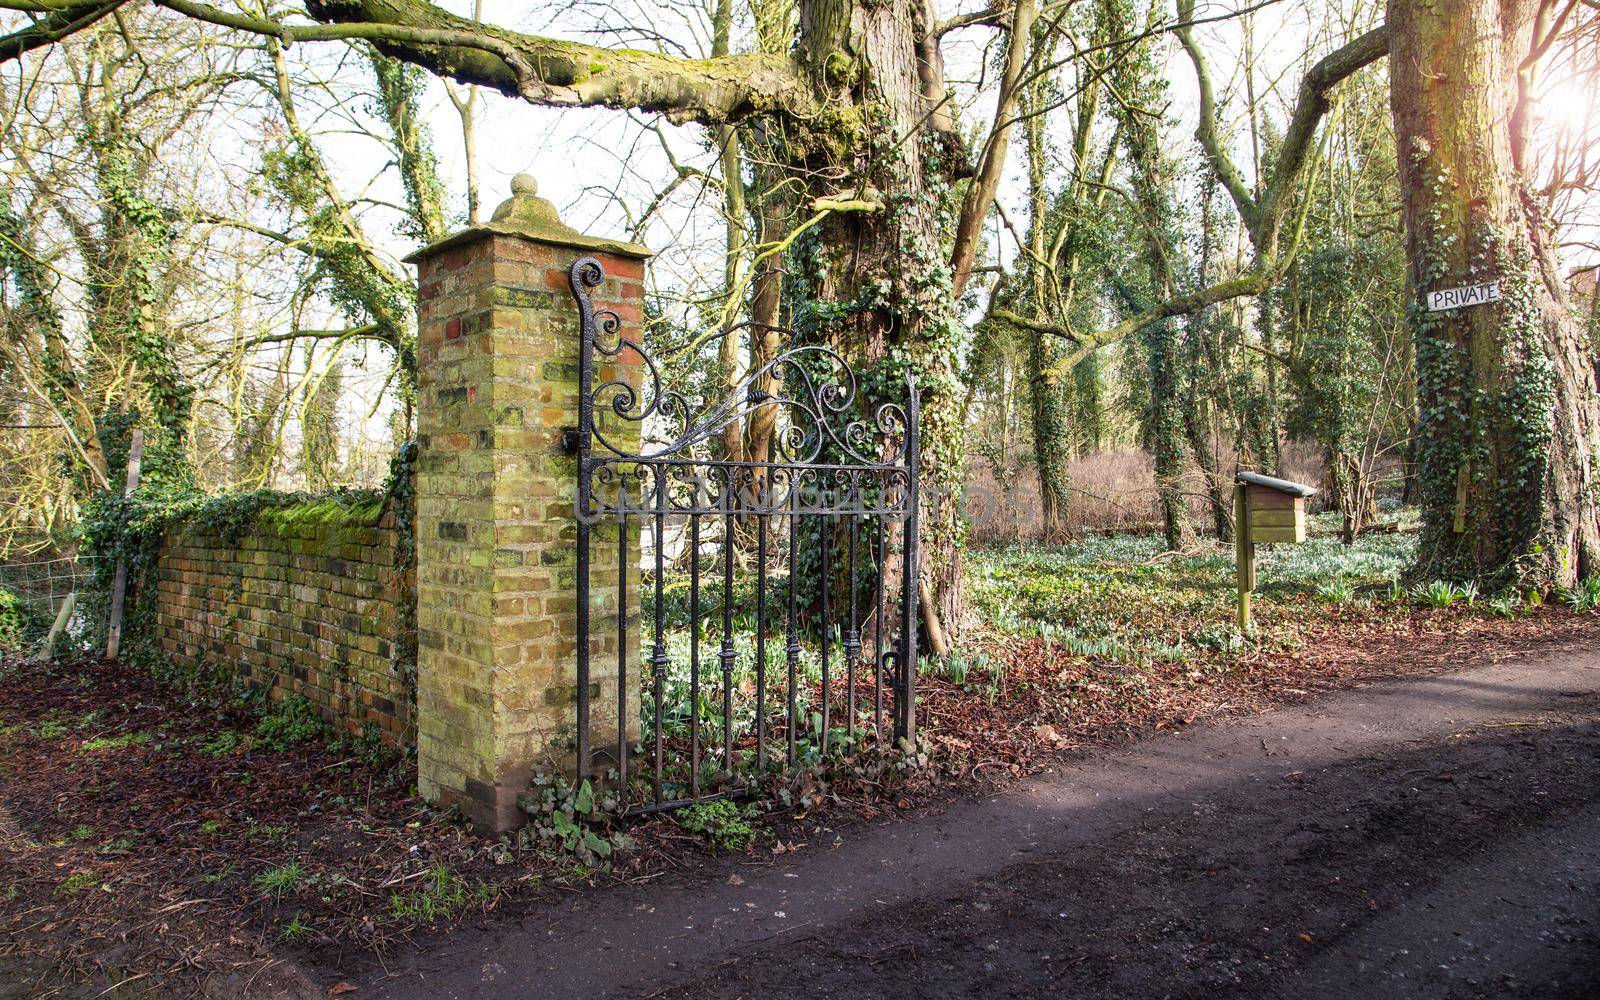 Gated Entrance to a private property, park. Old antique metal iron gate. Suffolk UK, spring time, snowdrops filed